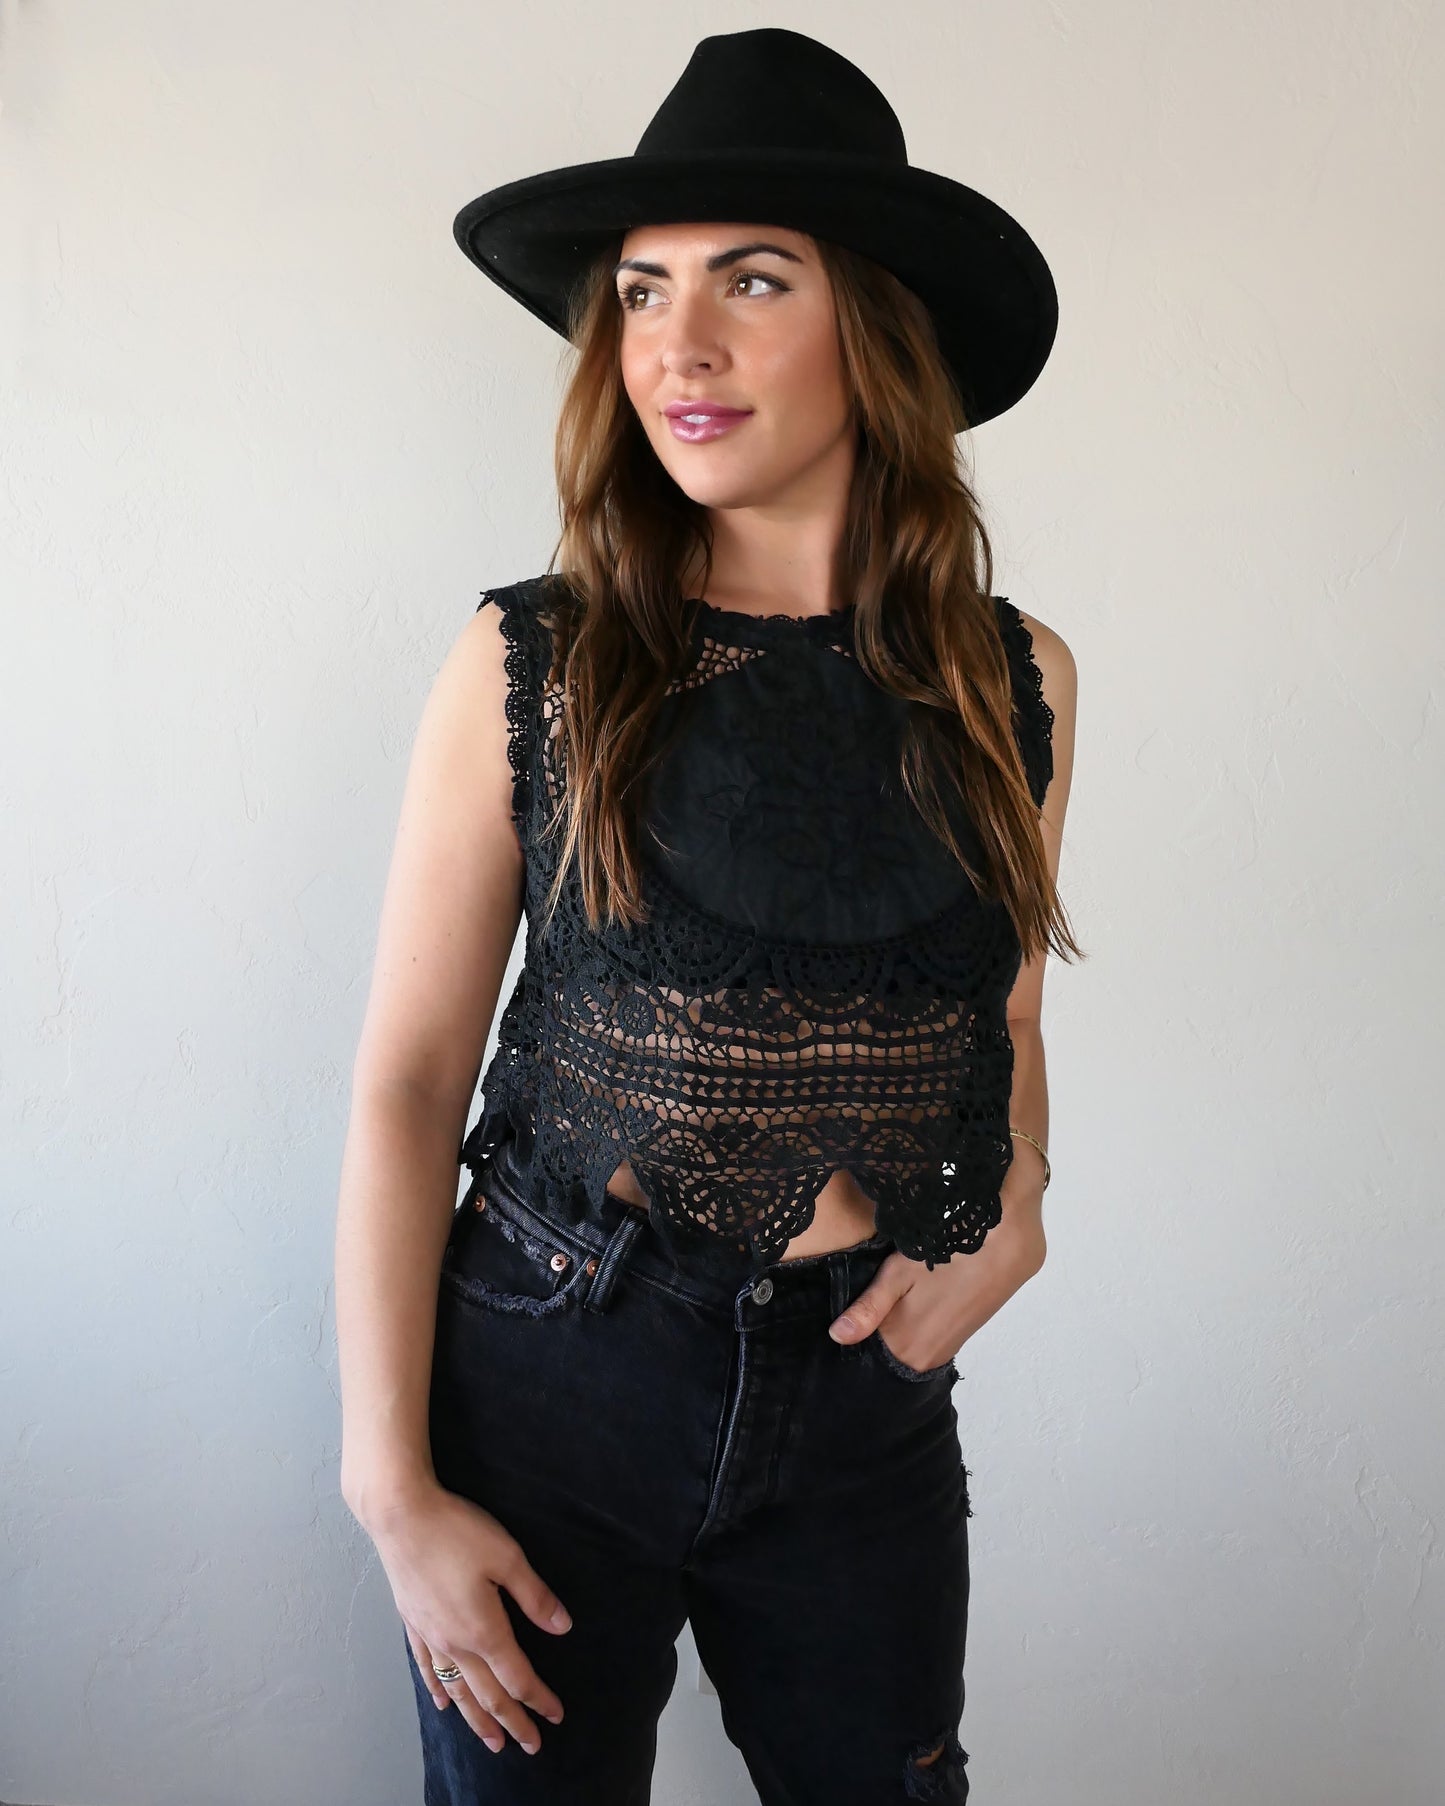 Get ready to rock and roll with our vintage crochet and embroidered patchwork crop tank top that has both an edgy and feminine vibe. We've used one of our vintage rose motif embroidered patchwork fabrics to make this limited edition, one-of-a-kind top. Looks great with a pair of black jeans, boots, and a cowboy hat.